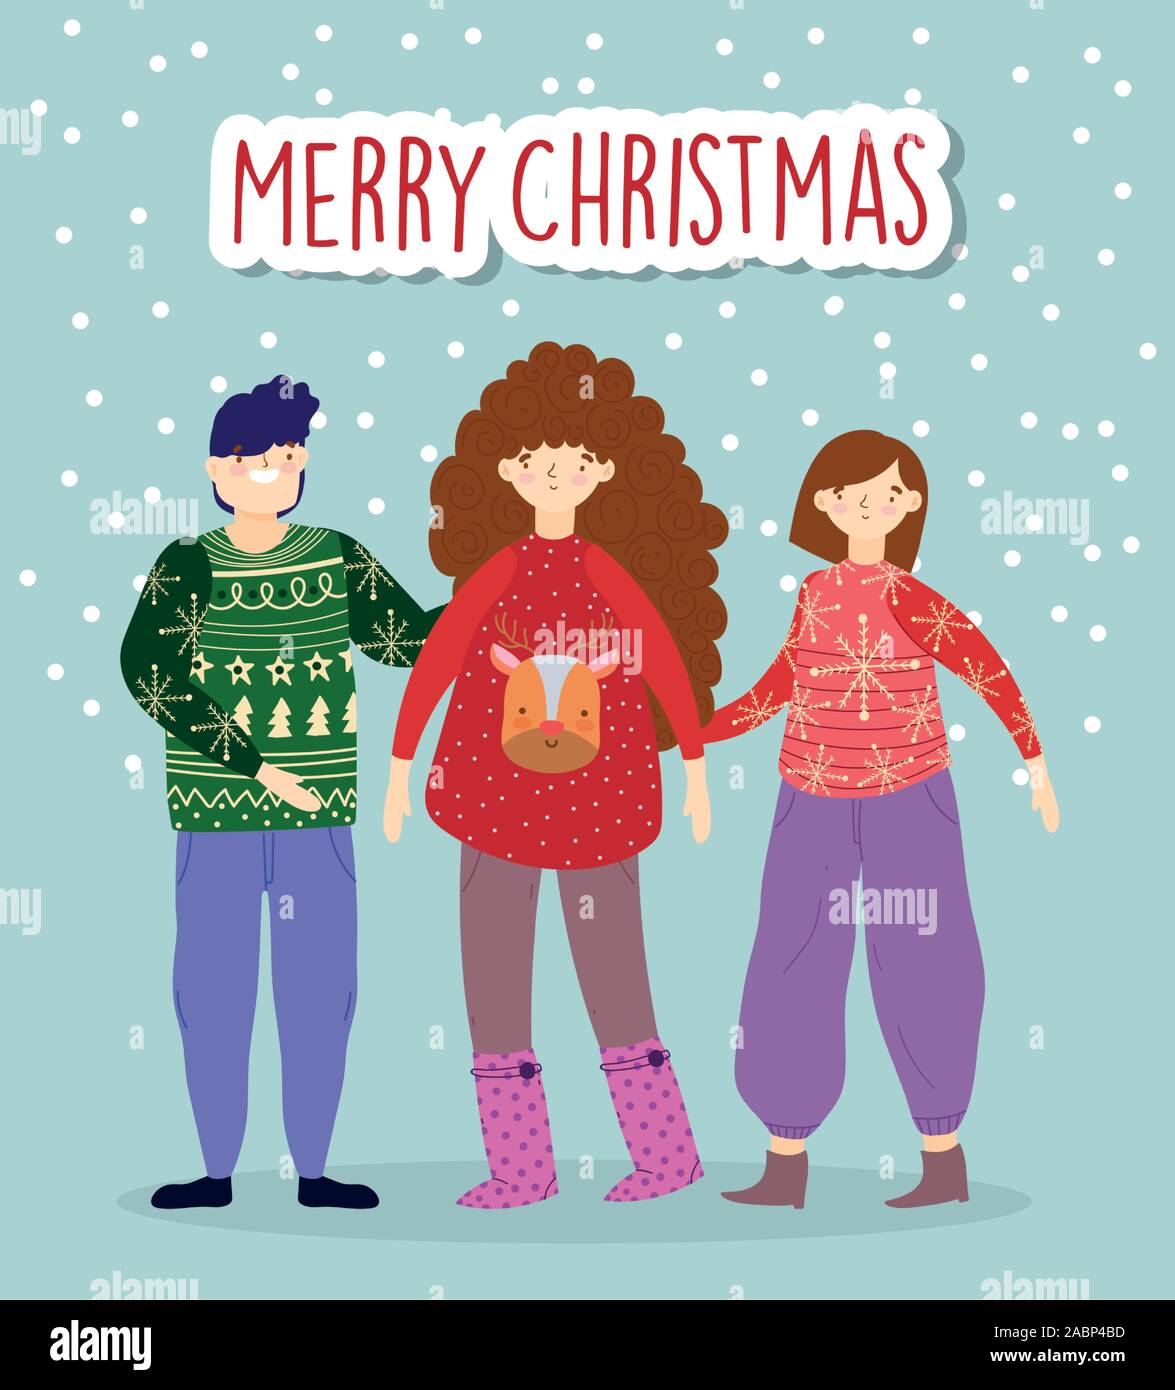 merry christmas celebration people wearing ugly sweaters snow vector illustration Stock Vector